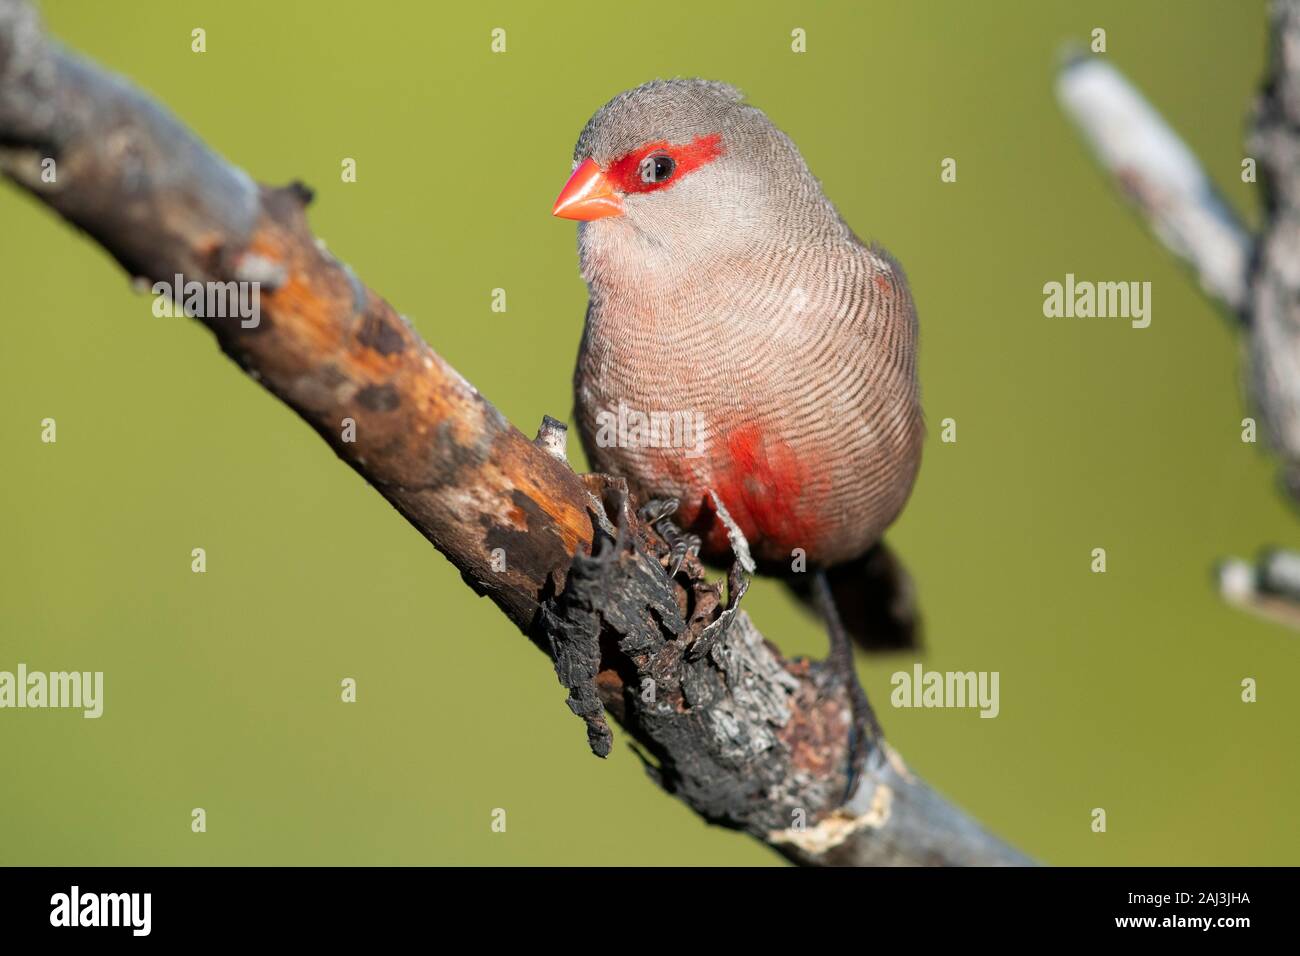 Common Waxbill (Estrilda astrild), front view of an adult perched on a branch, Western Cape, South Africa Stock Photo